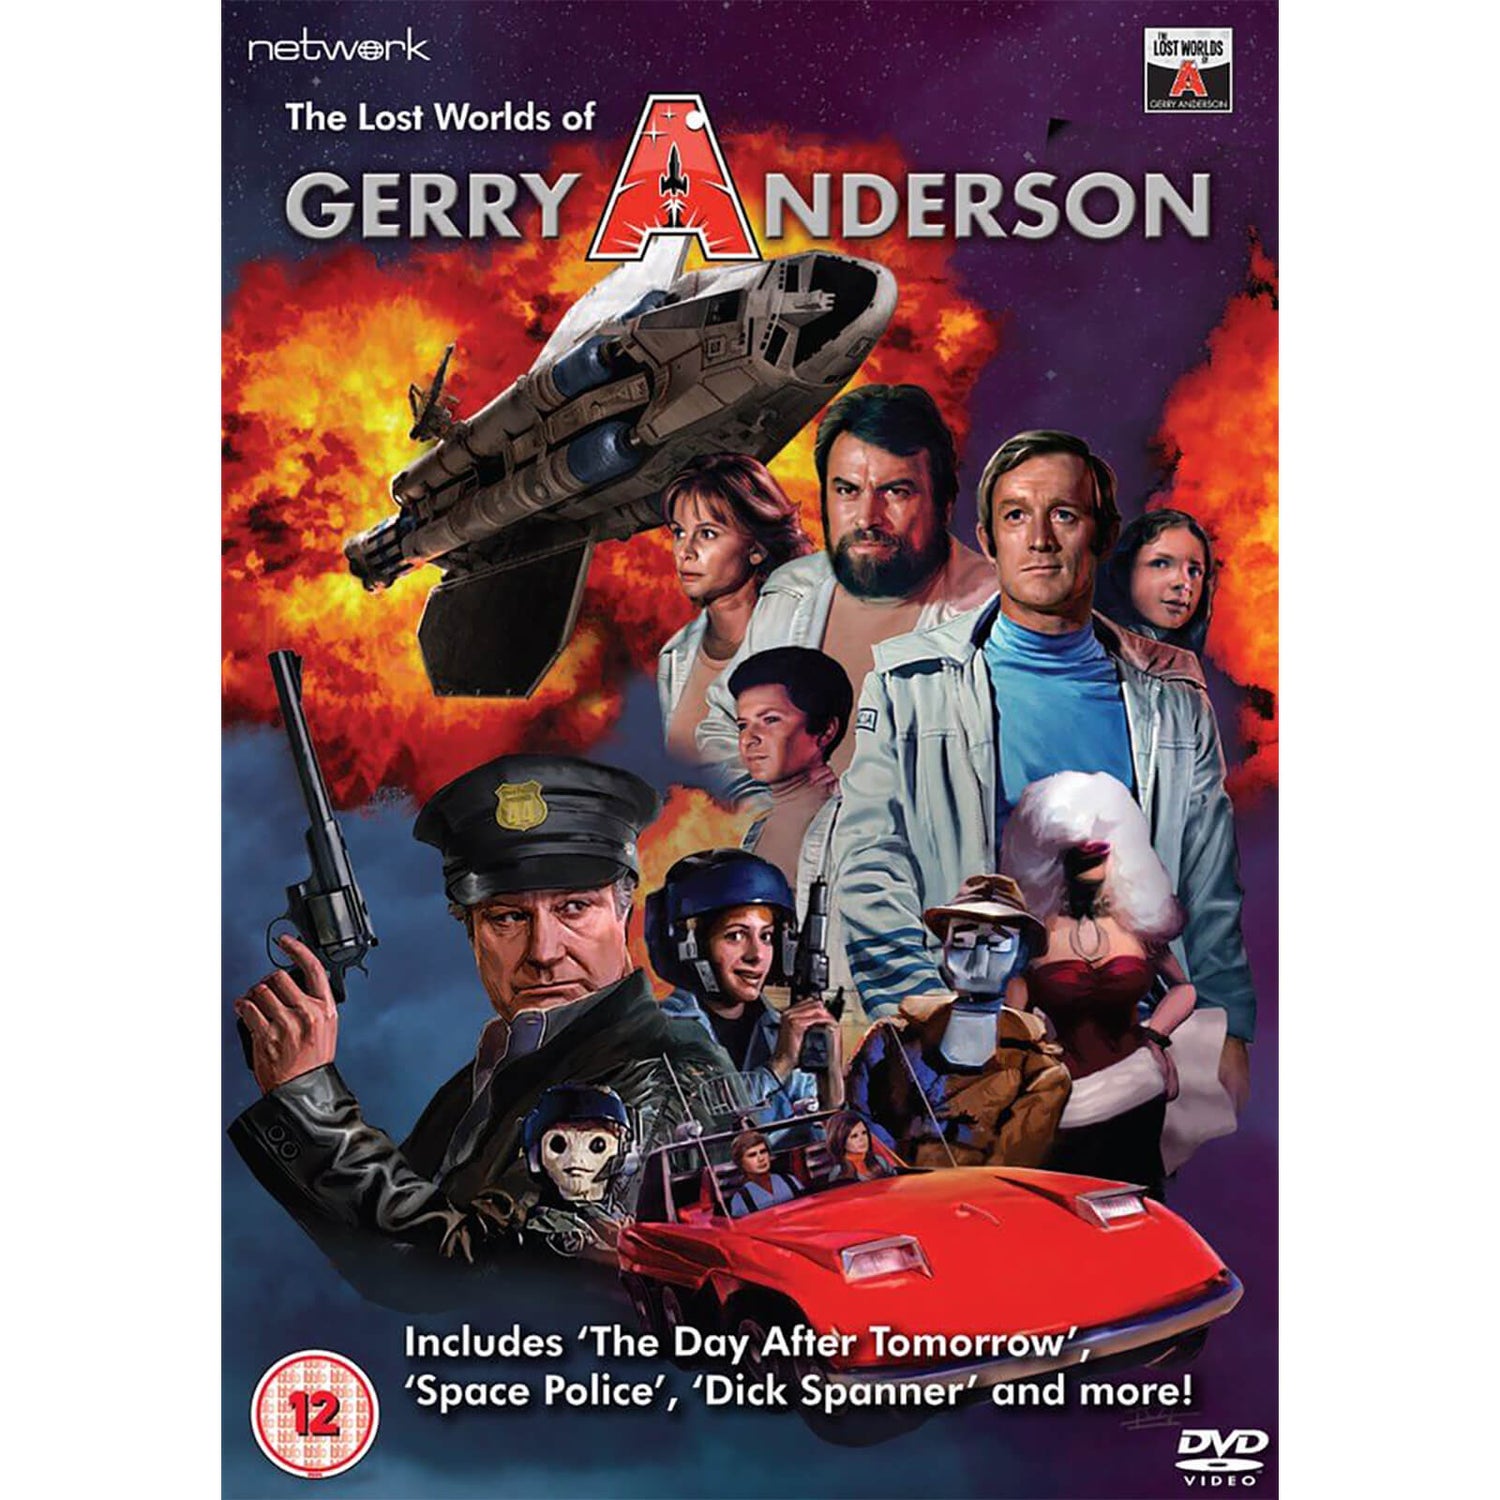 The Lost Worlds of Gerry Anderson